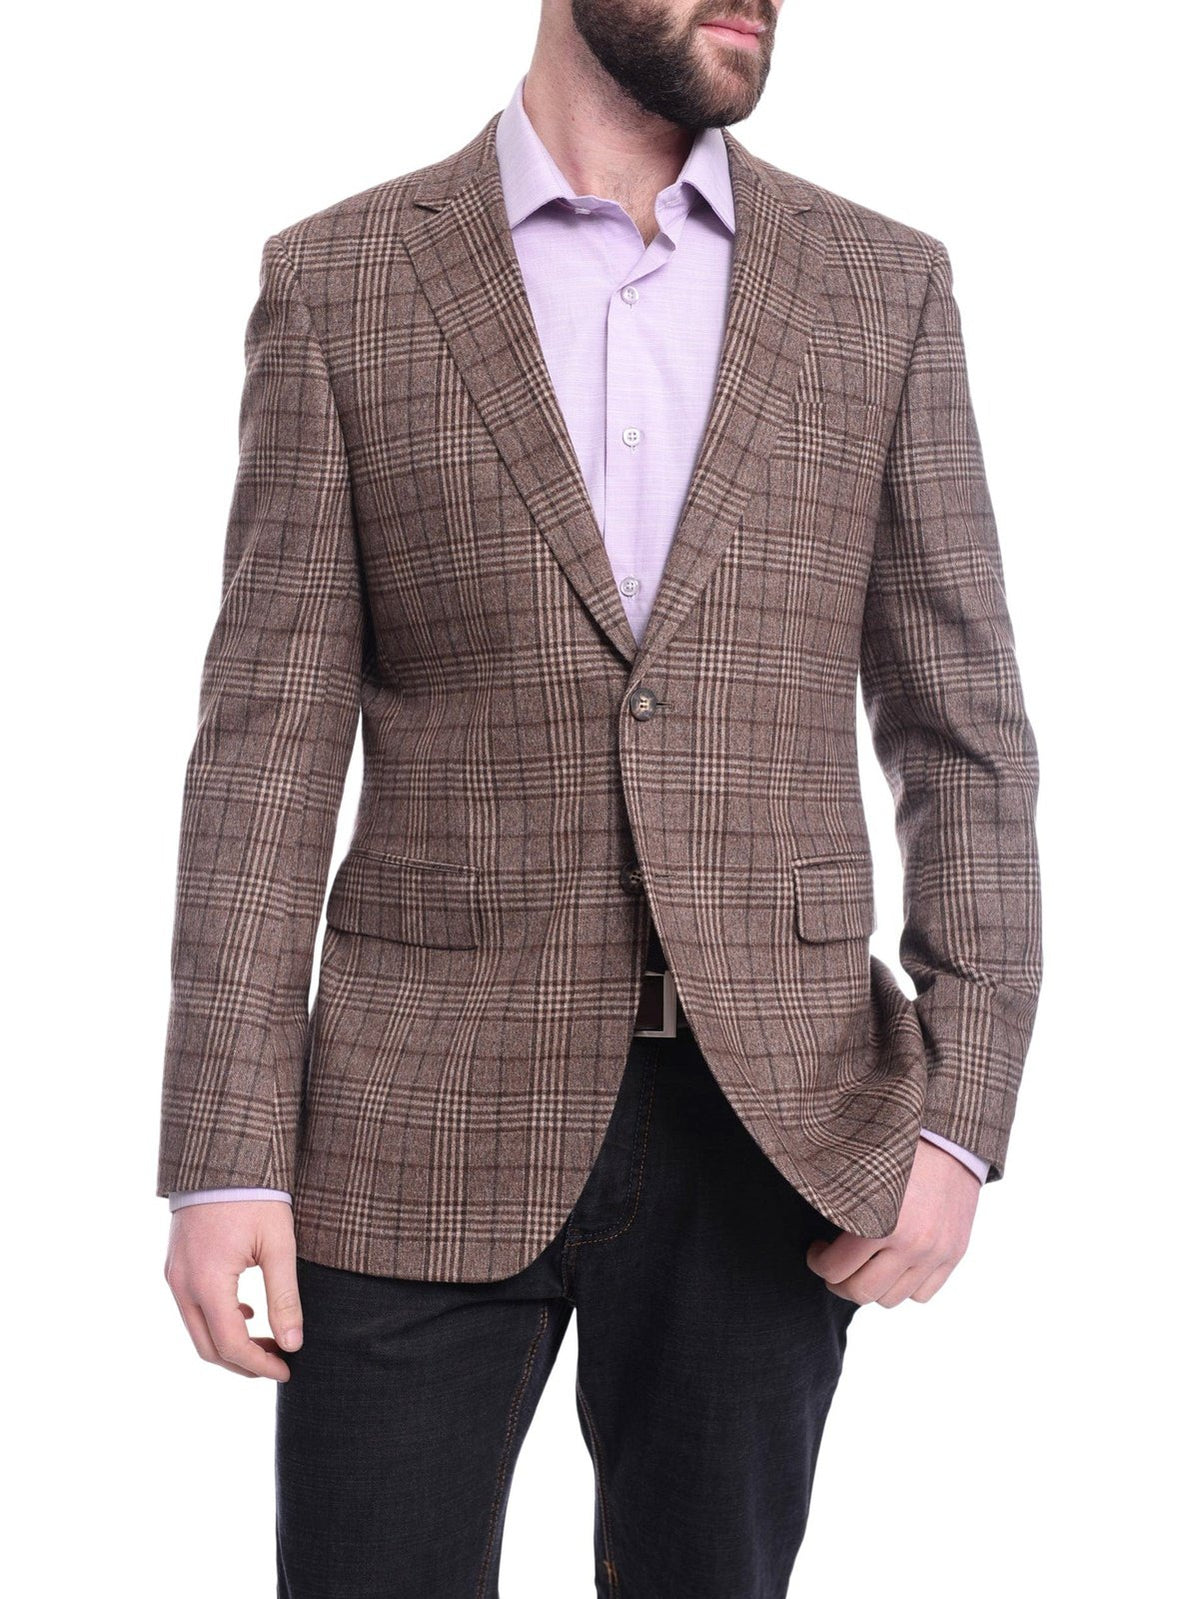 Napoli BLAZERS Napoli Slim Fit Brown Plaid Half Canvassed Flannel Wool Cashmere Blend Sportcoat